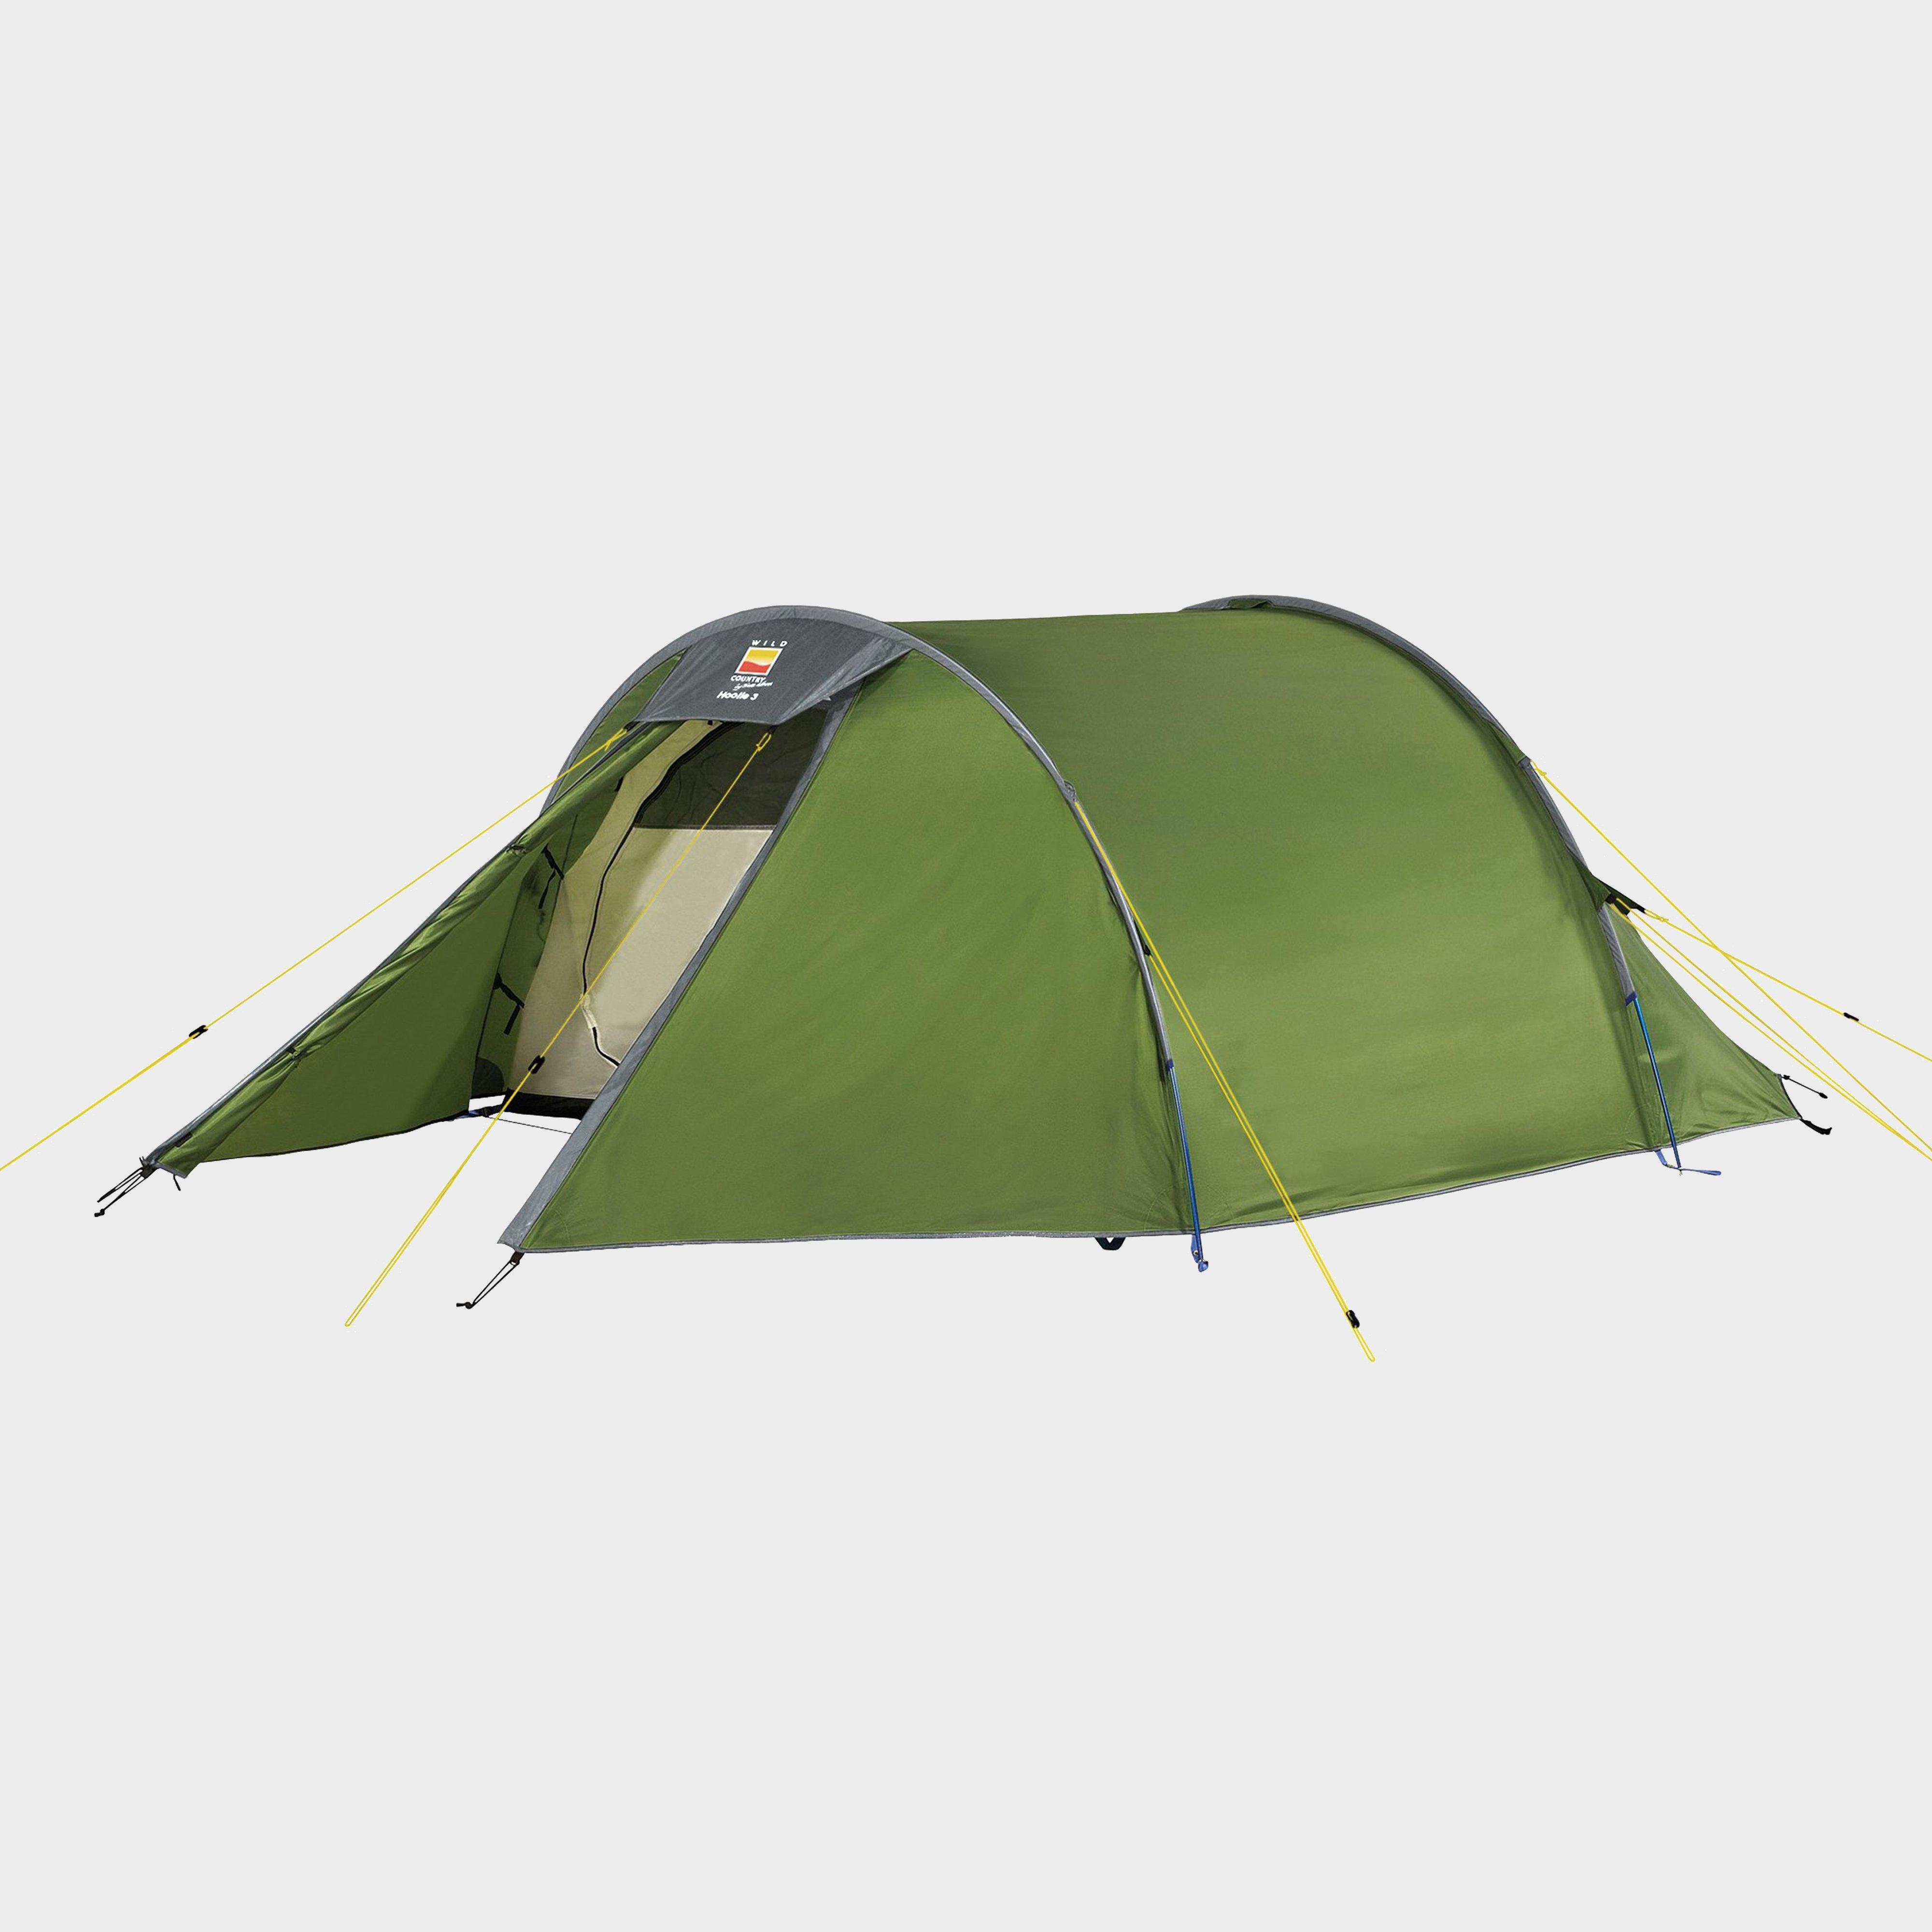 Wild Country Wild Country Hoolie Compact 3 Tent - Green, Green